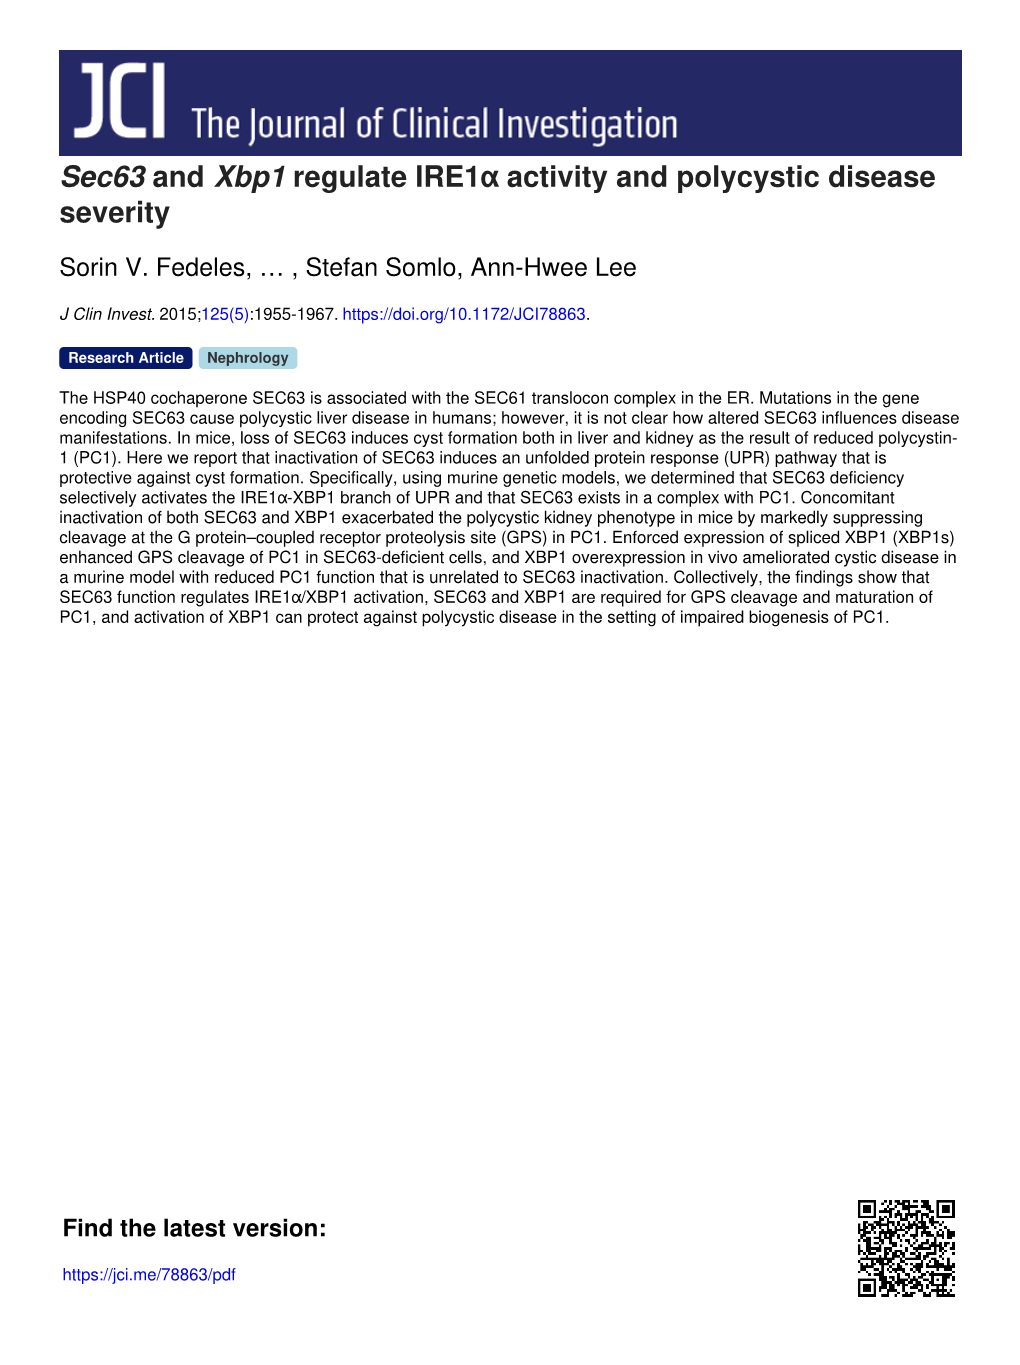 Sec63 and Xbp1 Regulate Ire1α Activity and Polycystic Disease Severity